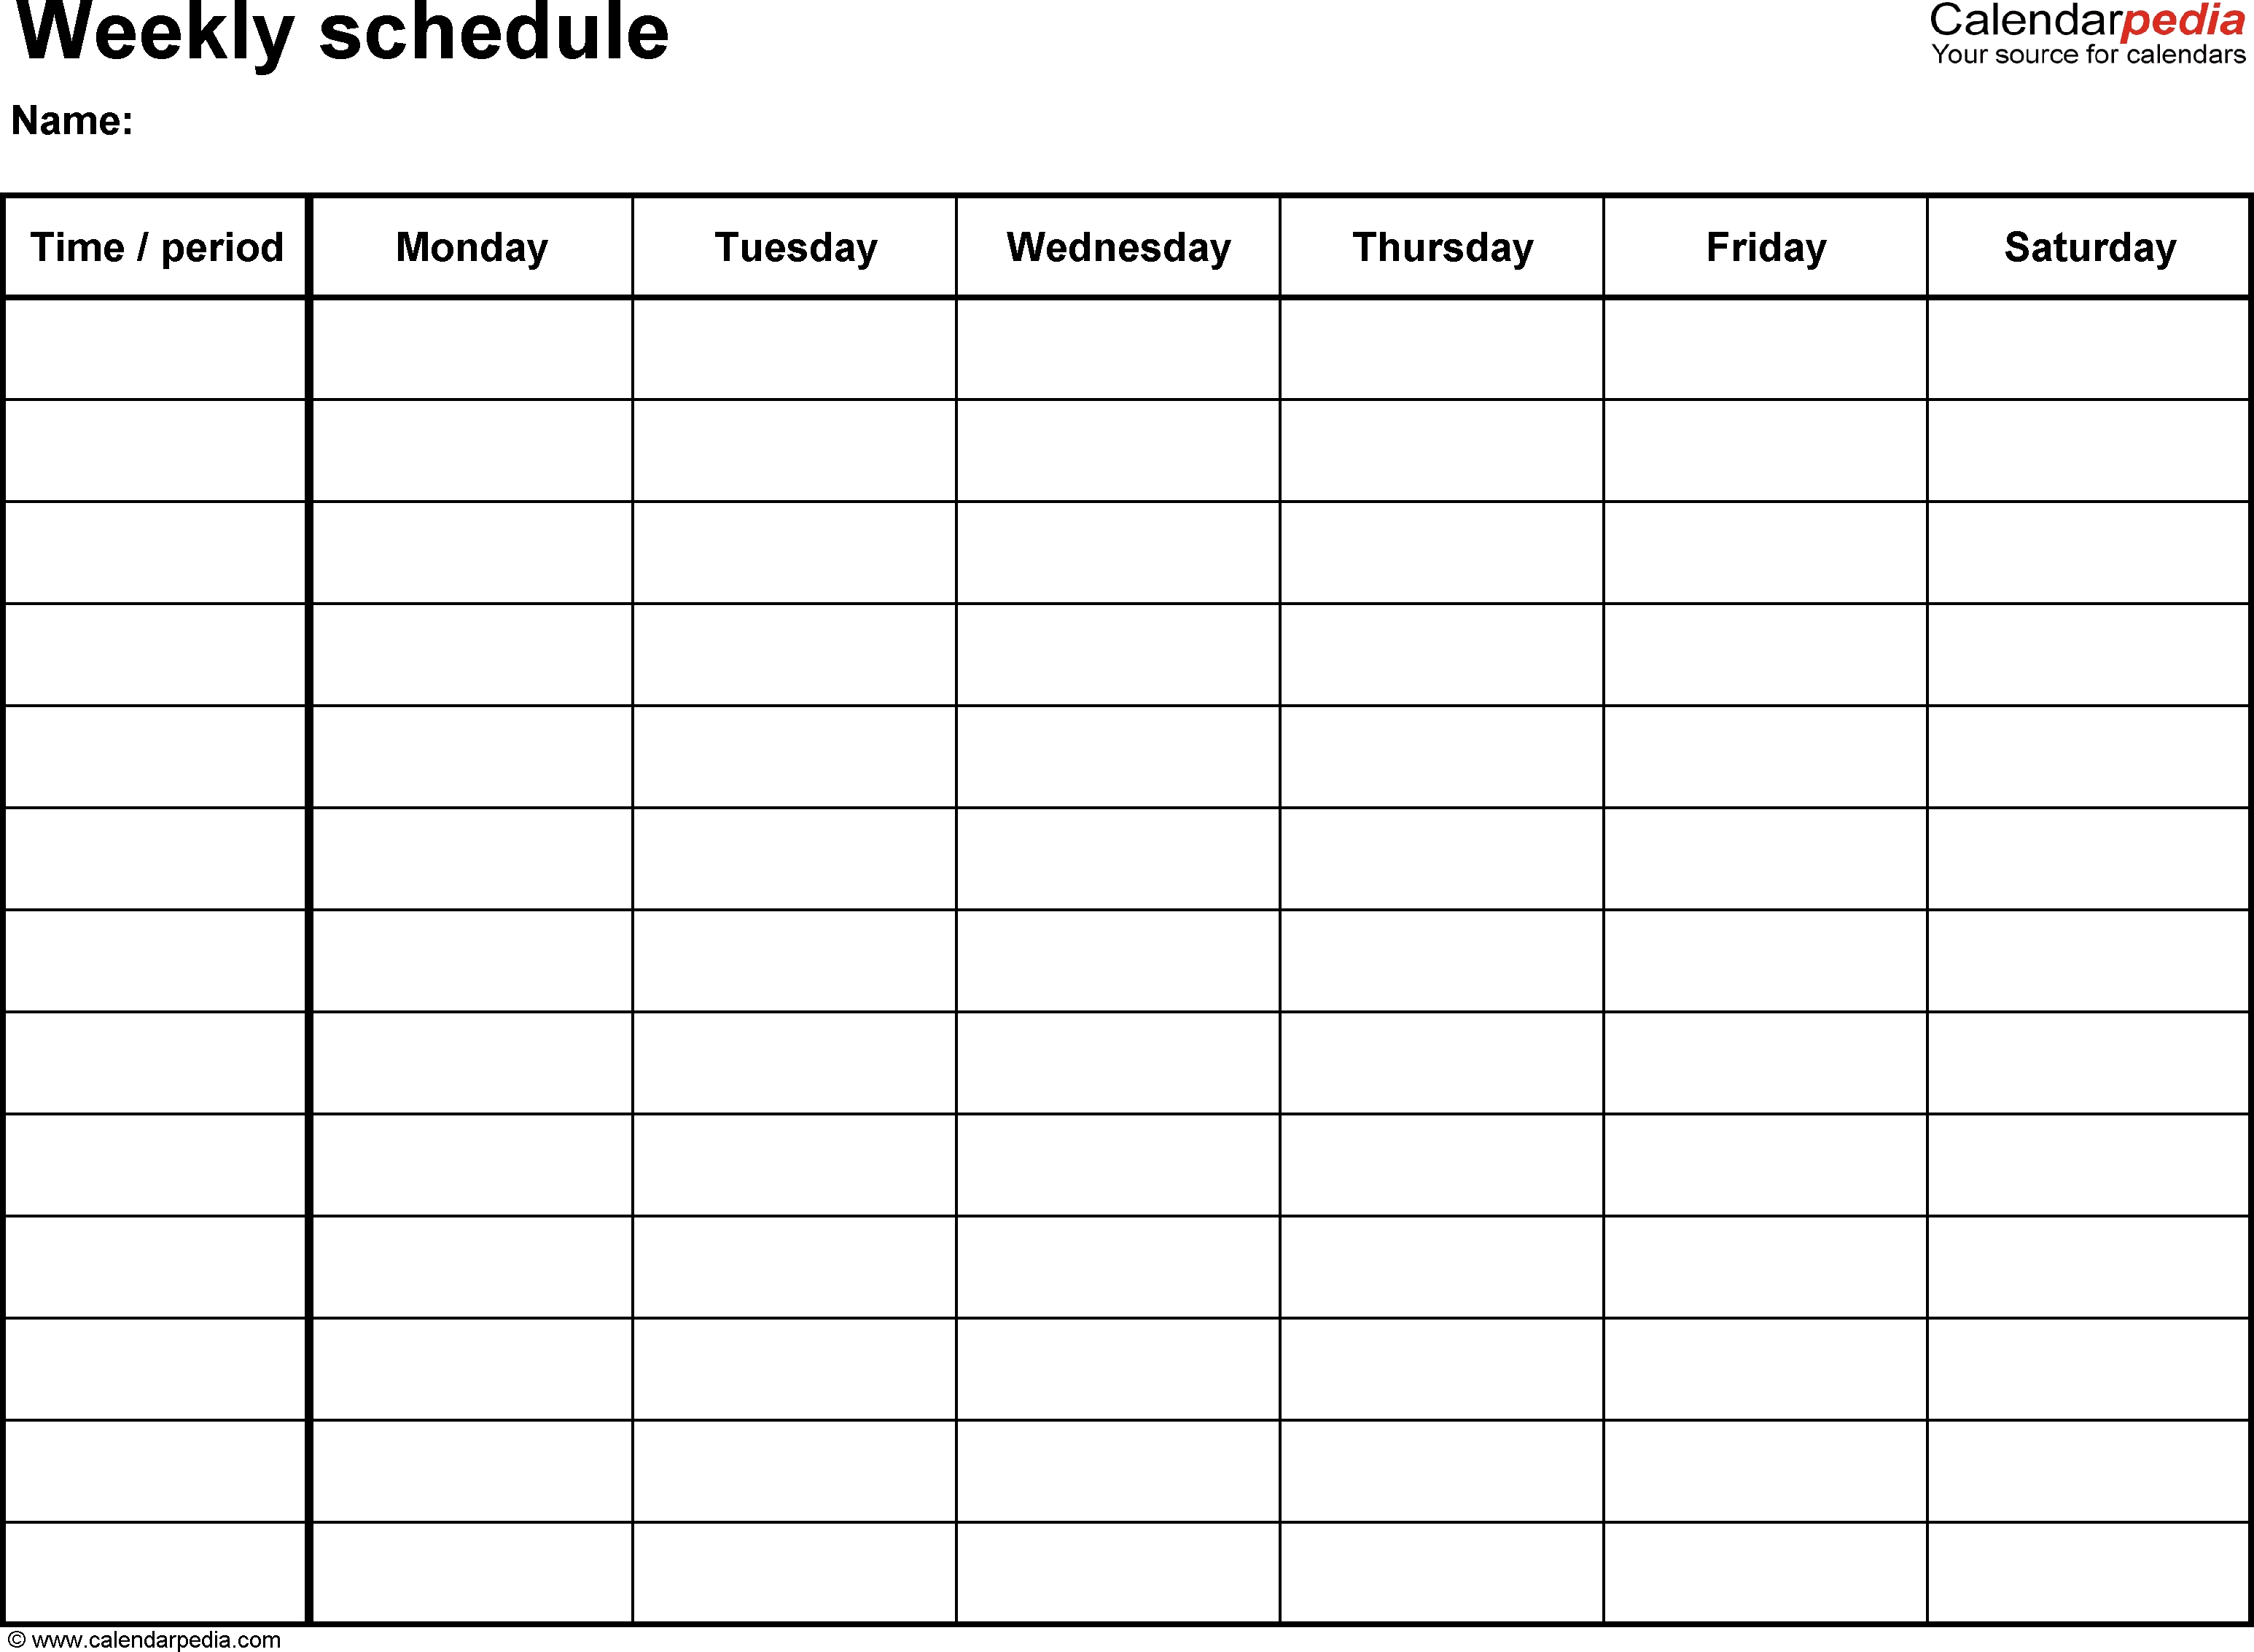 Free Weekly Schedule Templates For Word - 18 Templates-Monday To Sunday Weekly Planner Template Word